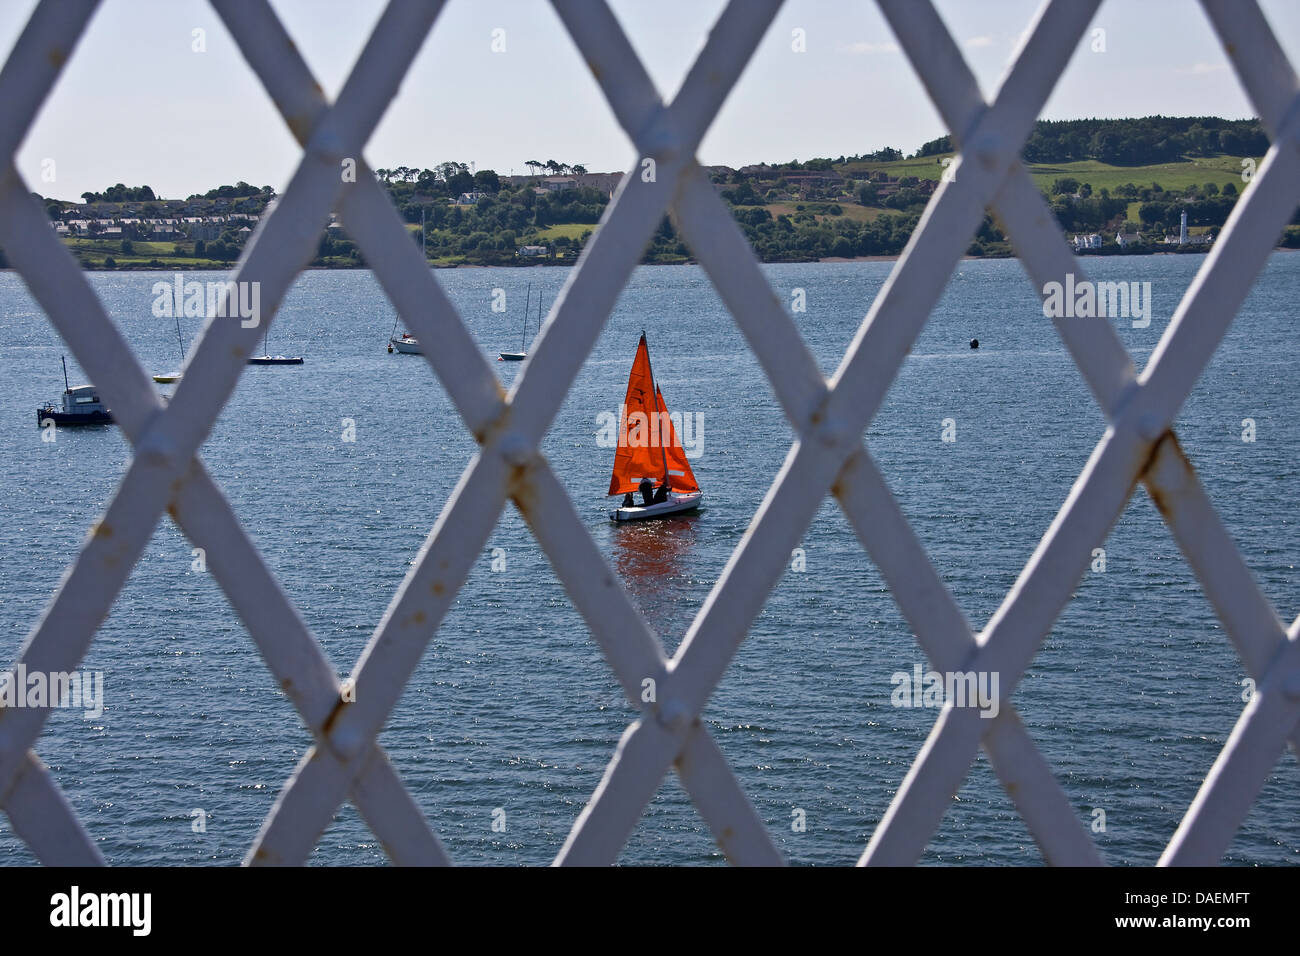 A Yacht from the Royal Tay Yacht Club sailing on the River Tay in Broughty Ferry near Dundee,UK Stock Photo